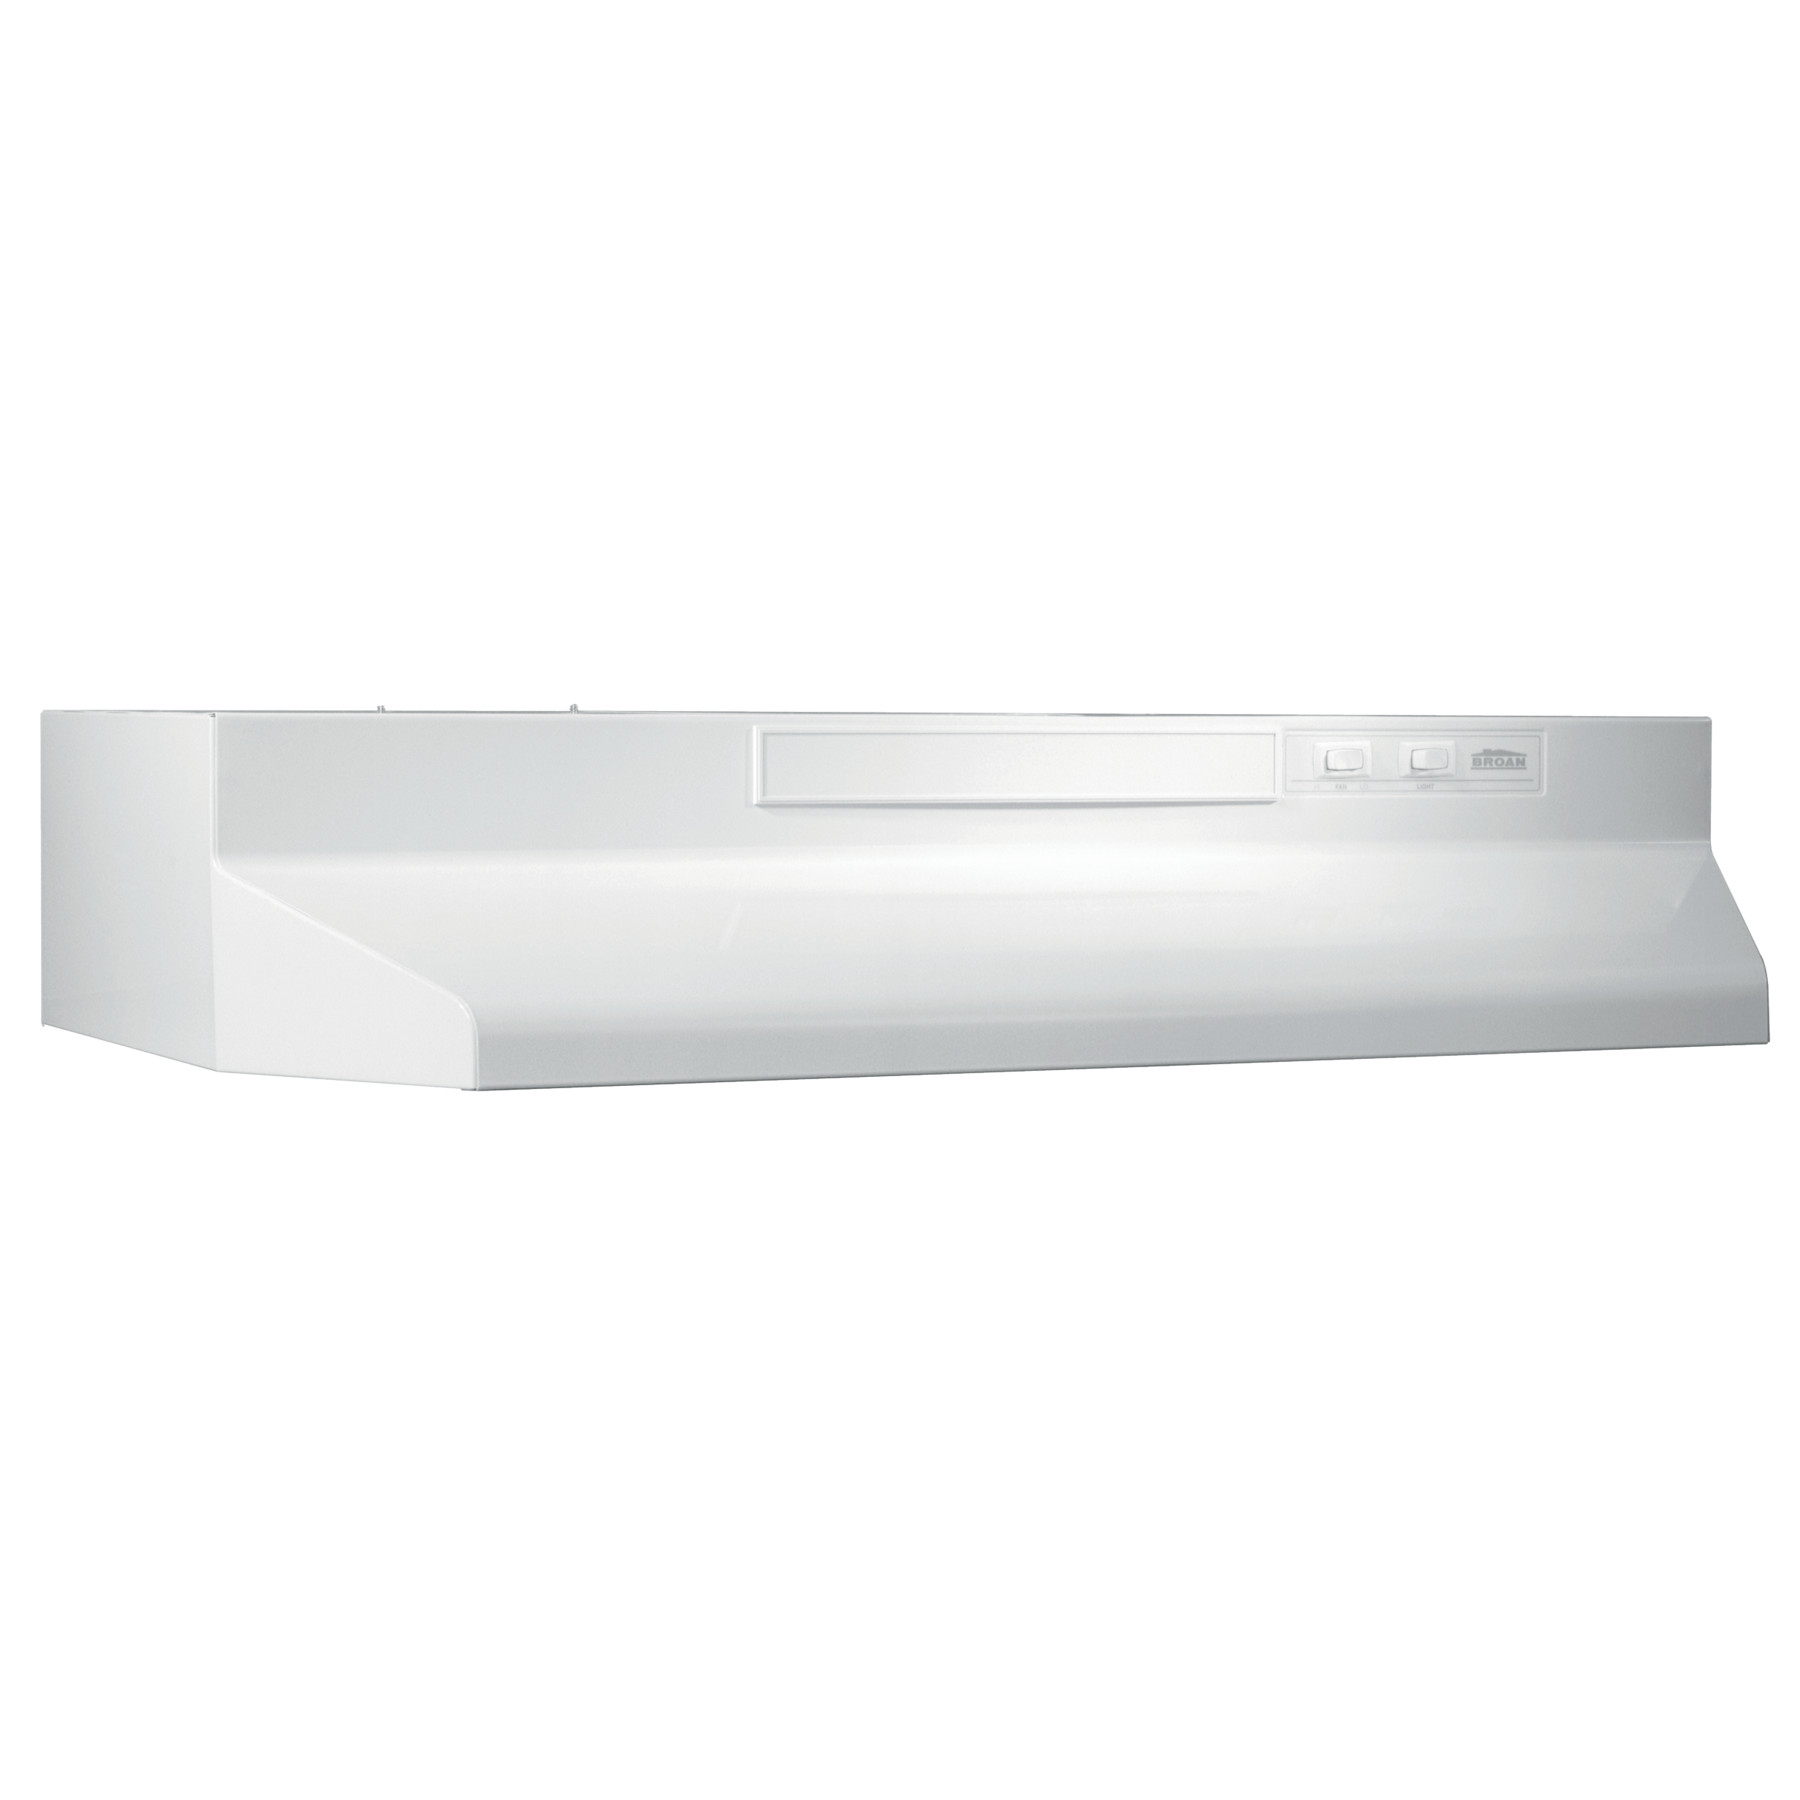 Broan® 30-Inch Convertible Under-Cabinet Range Hood w/ Easy Install System, 260 Max Blower CFM, White